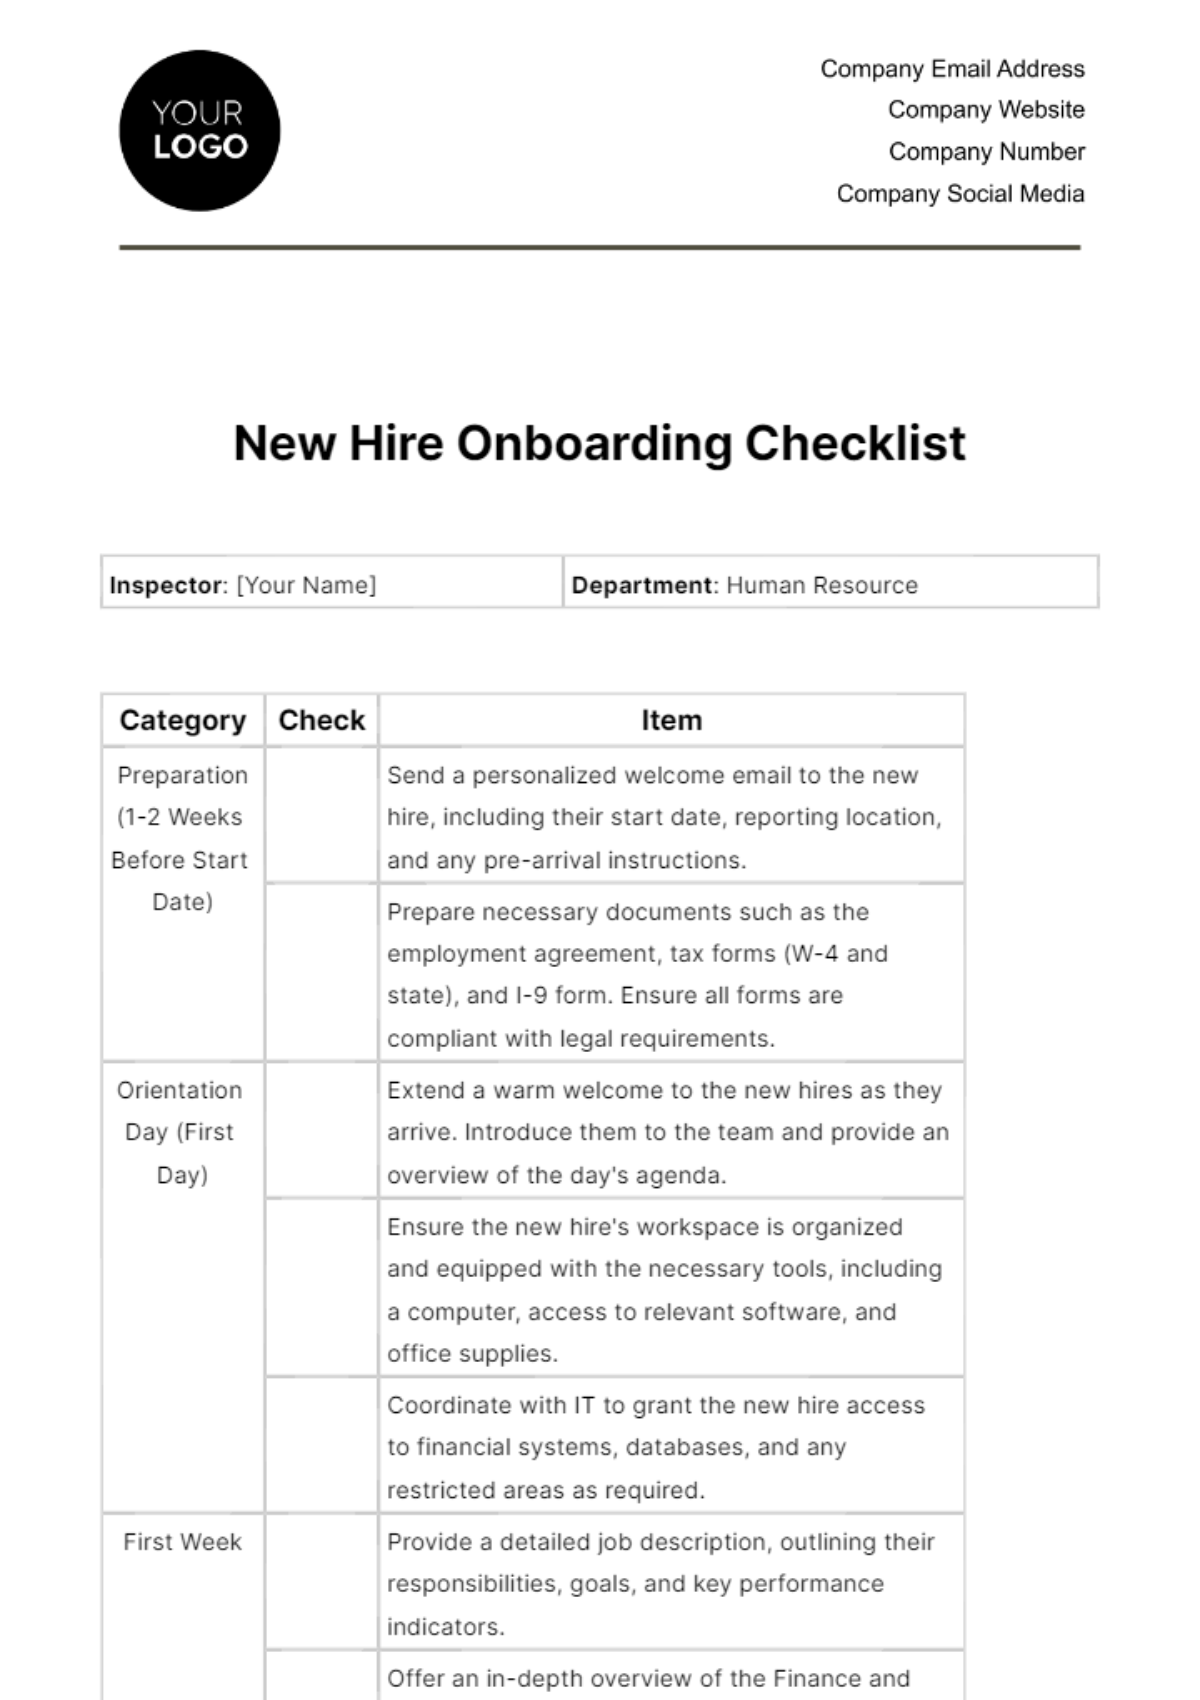 Free New Hire Onboarding Checklist HR Template